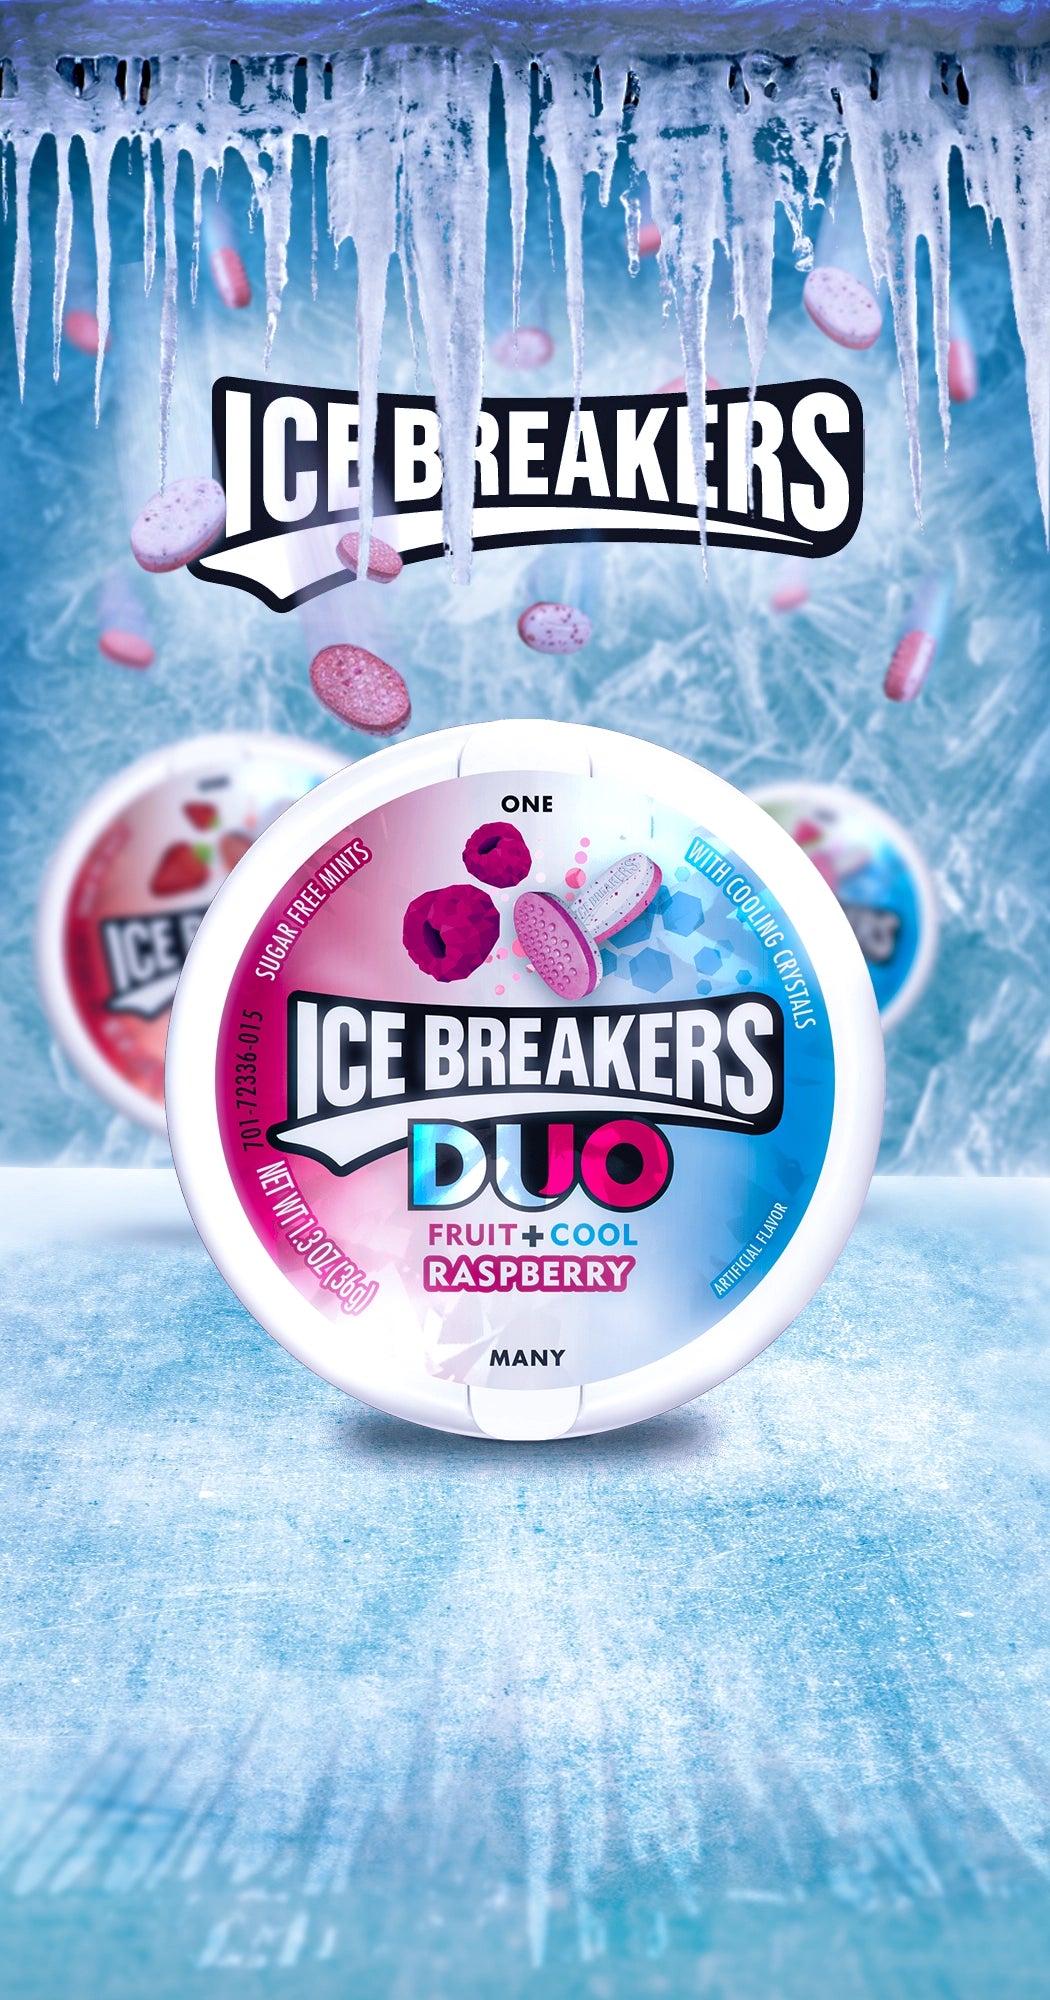 Ice breakers in collection mobile banner